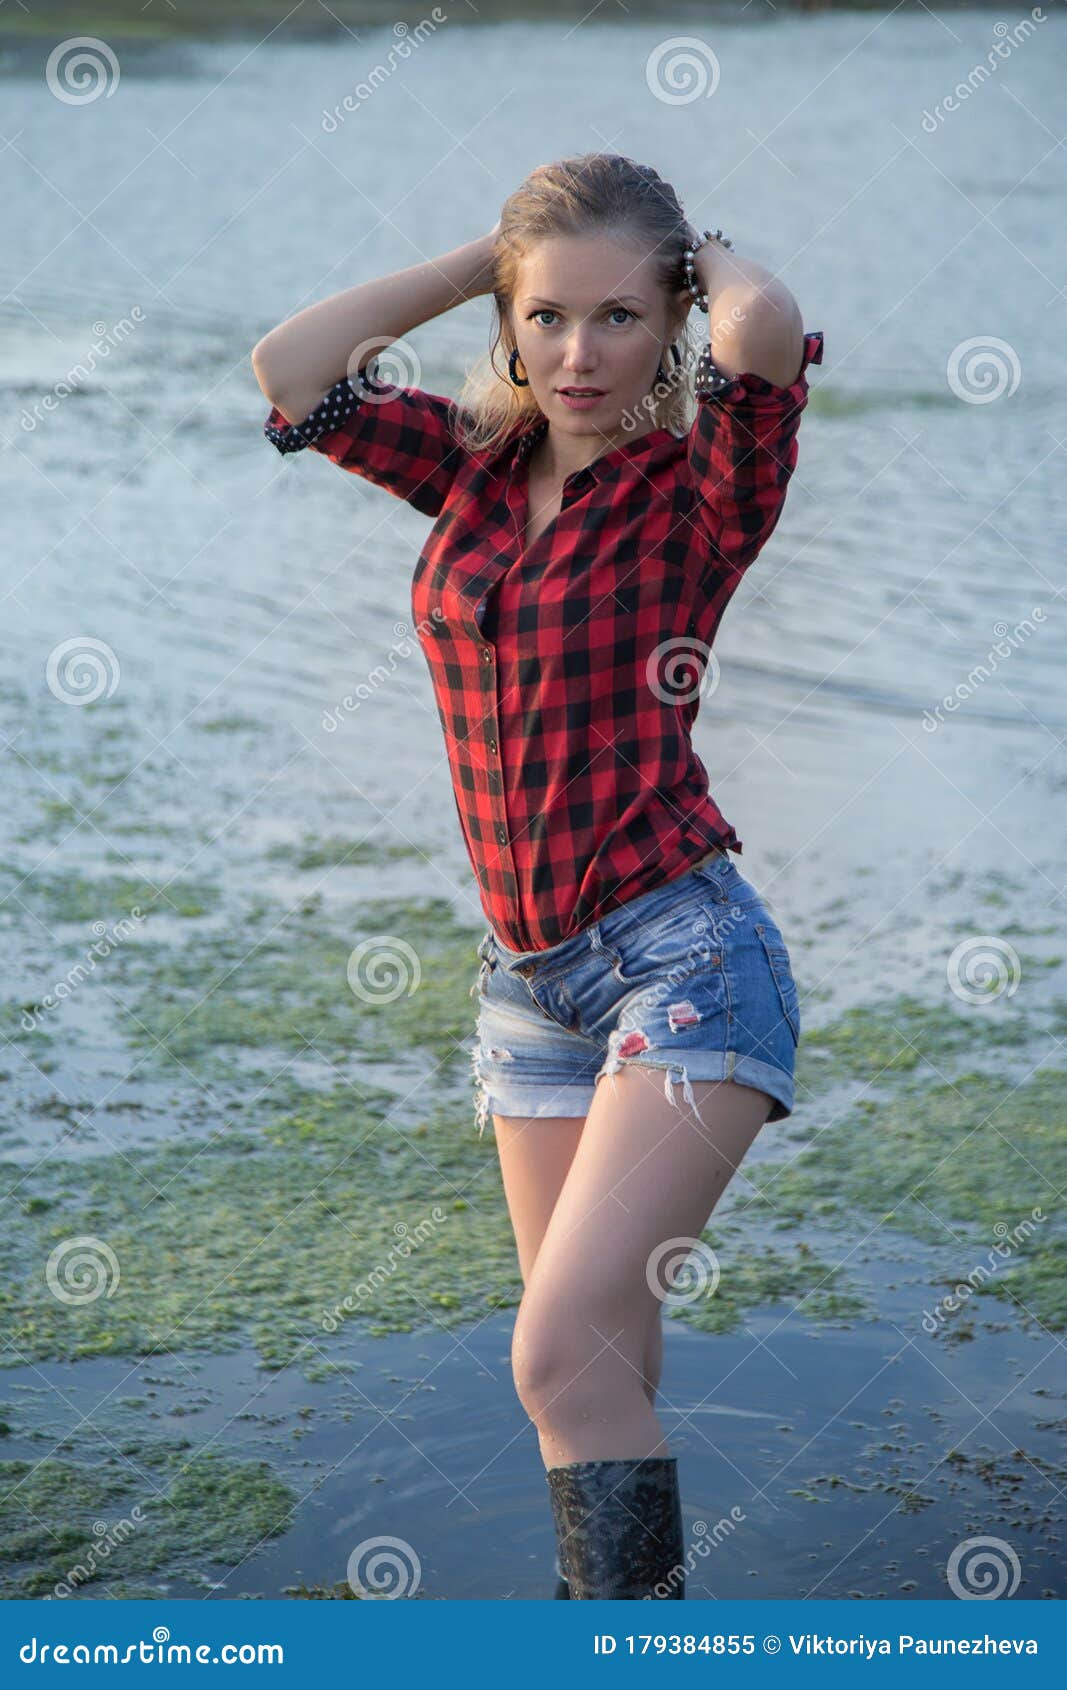 girl in shorts and boots